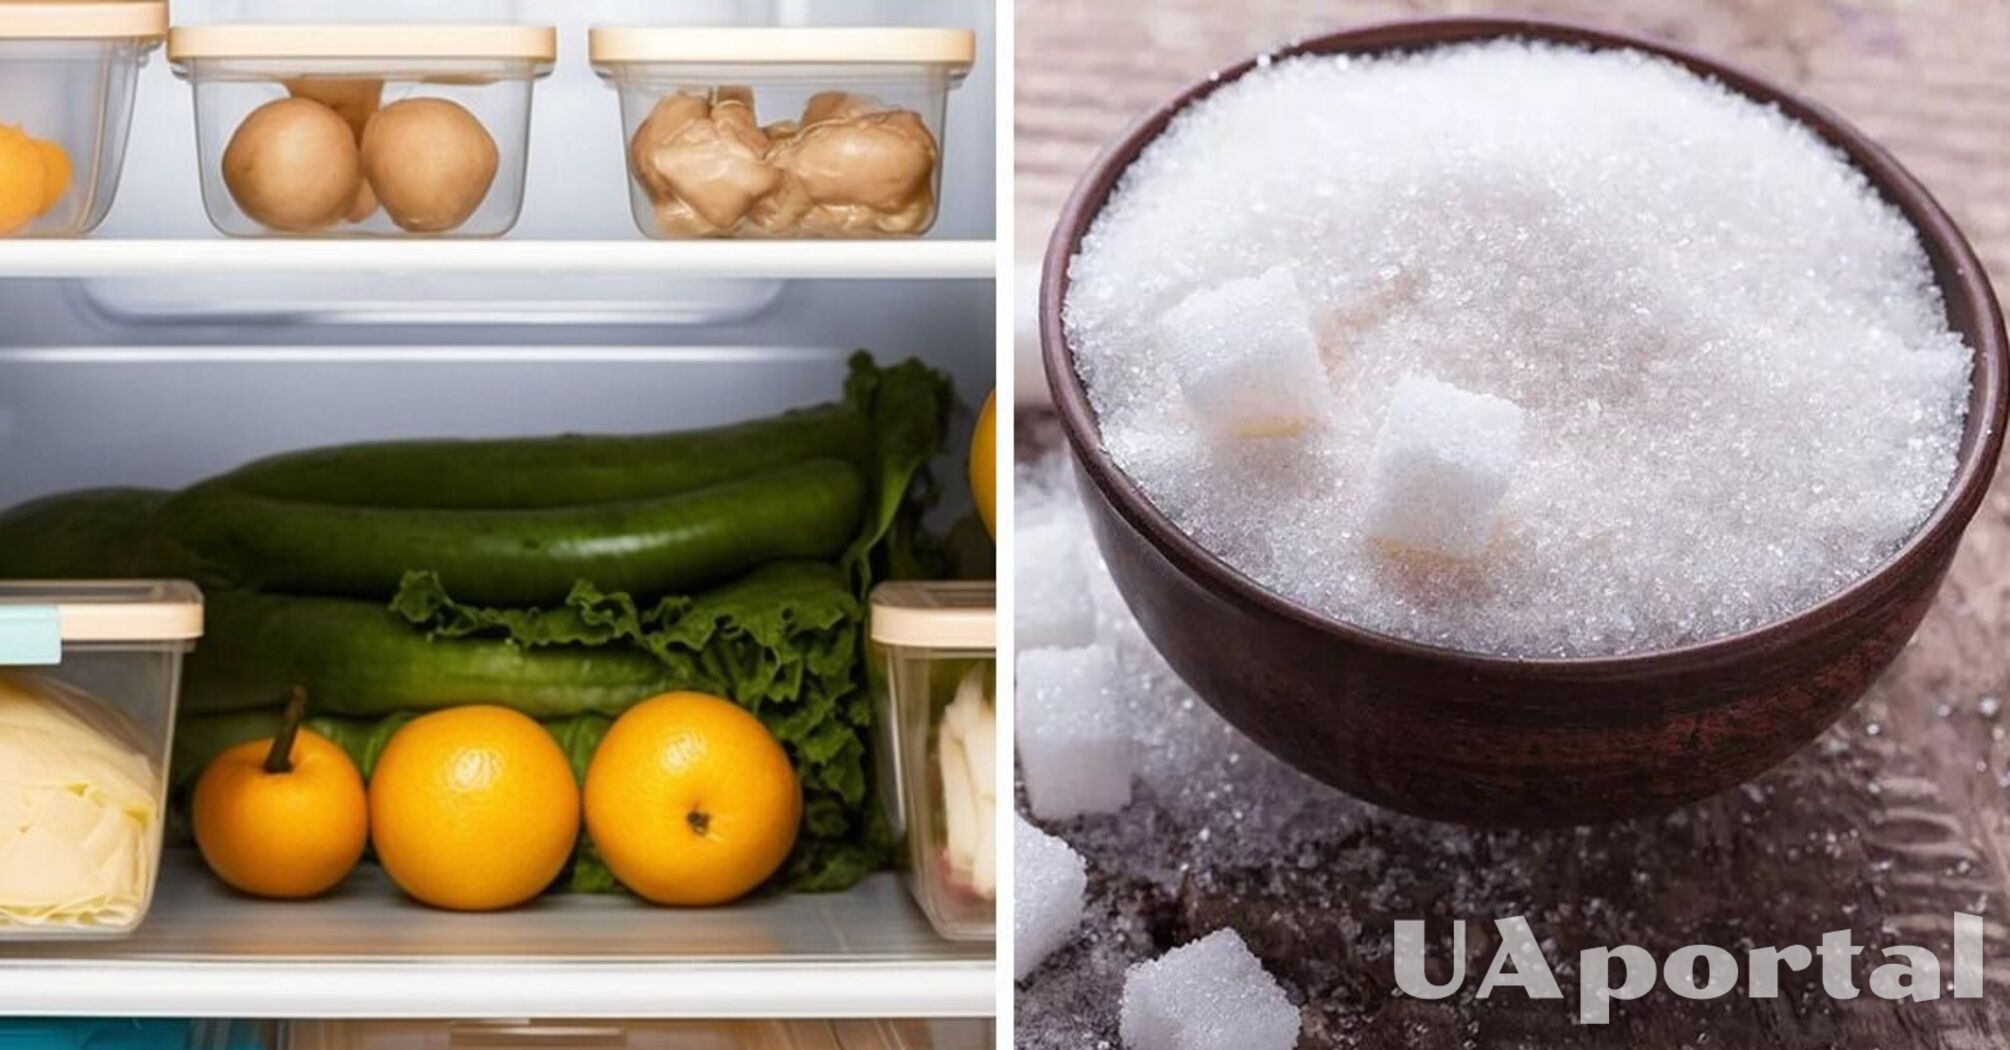 A surprisingly effective life hack: Why put sugar in the refrigerator